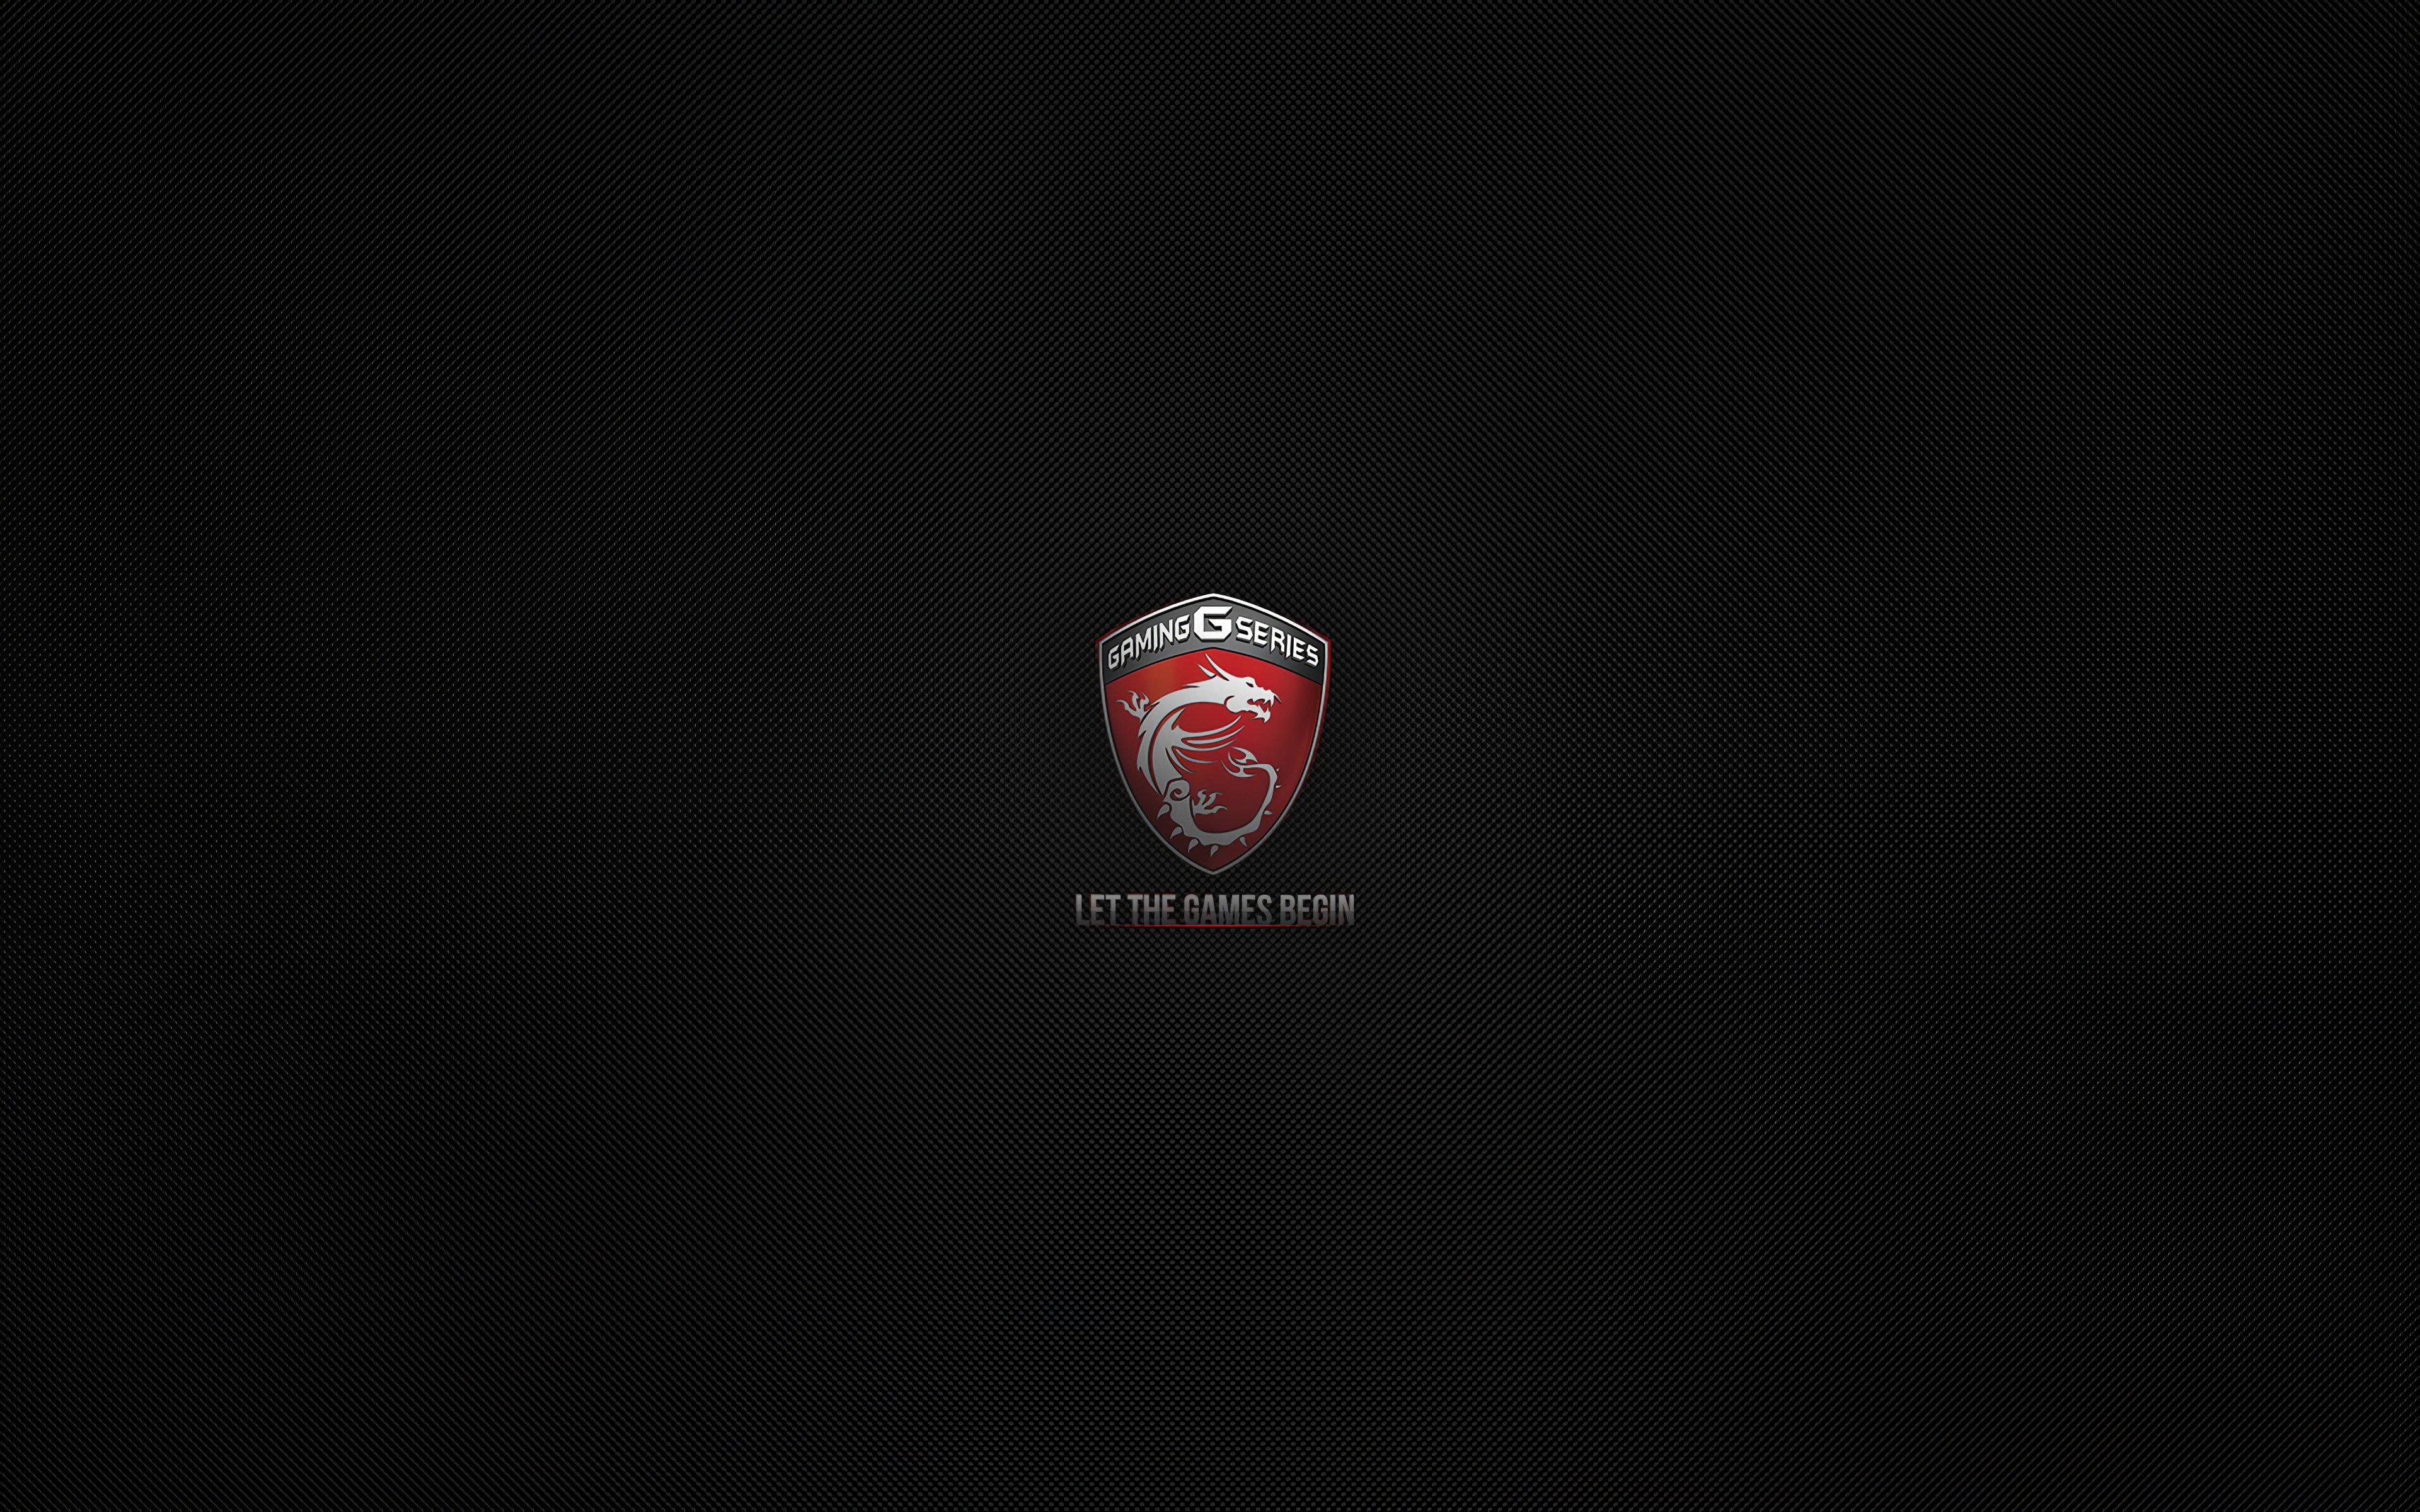 Gaming G Series Msi 4k Laptop HD HD 4k Wallpaper, Image, Background, Photo and Picture